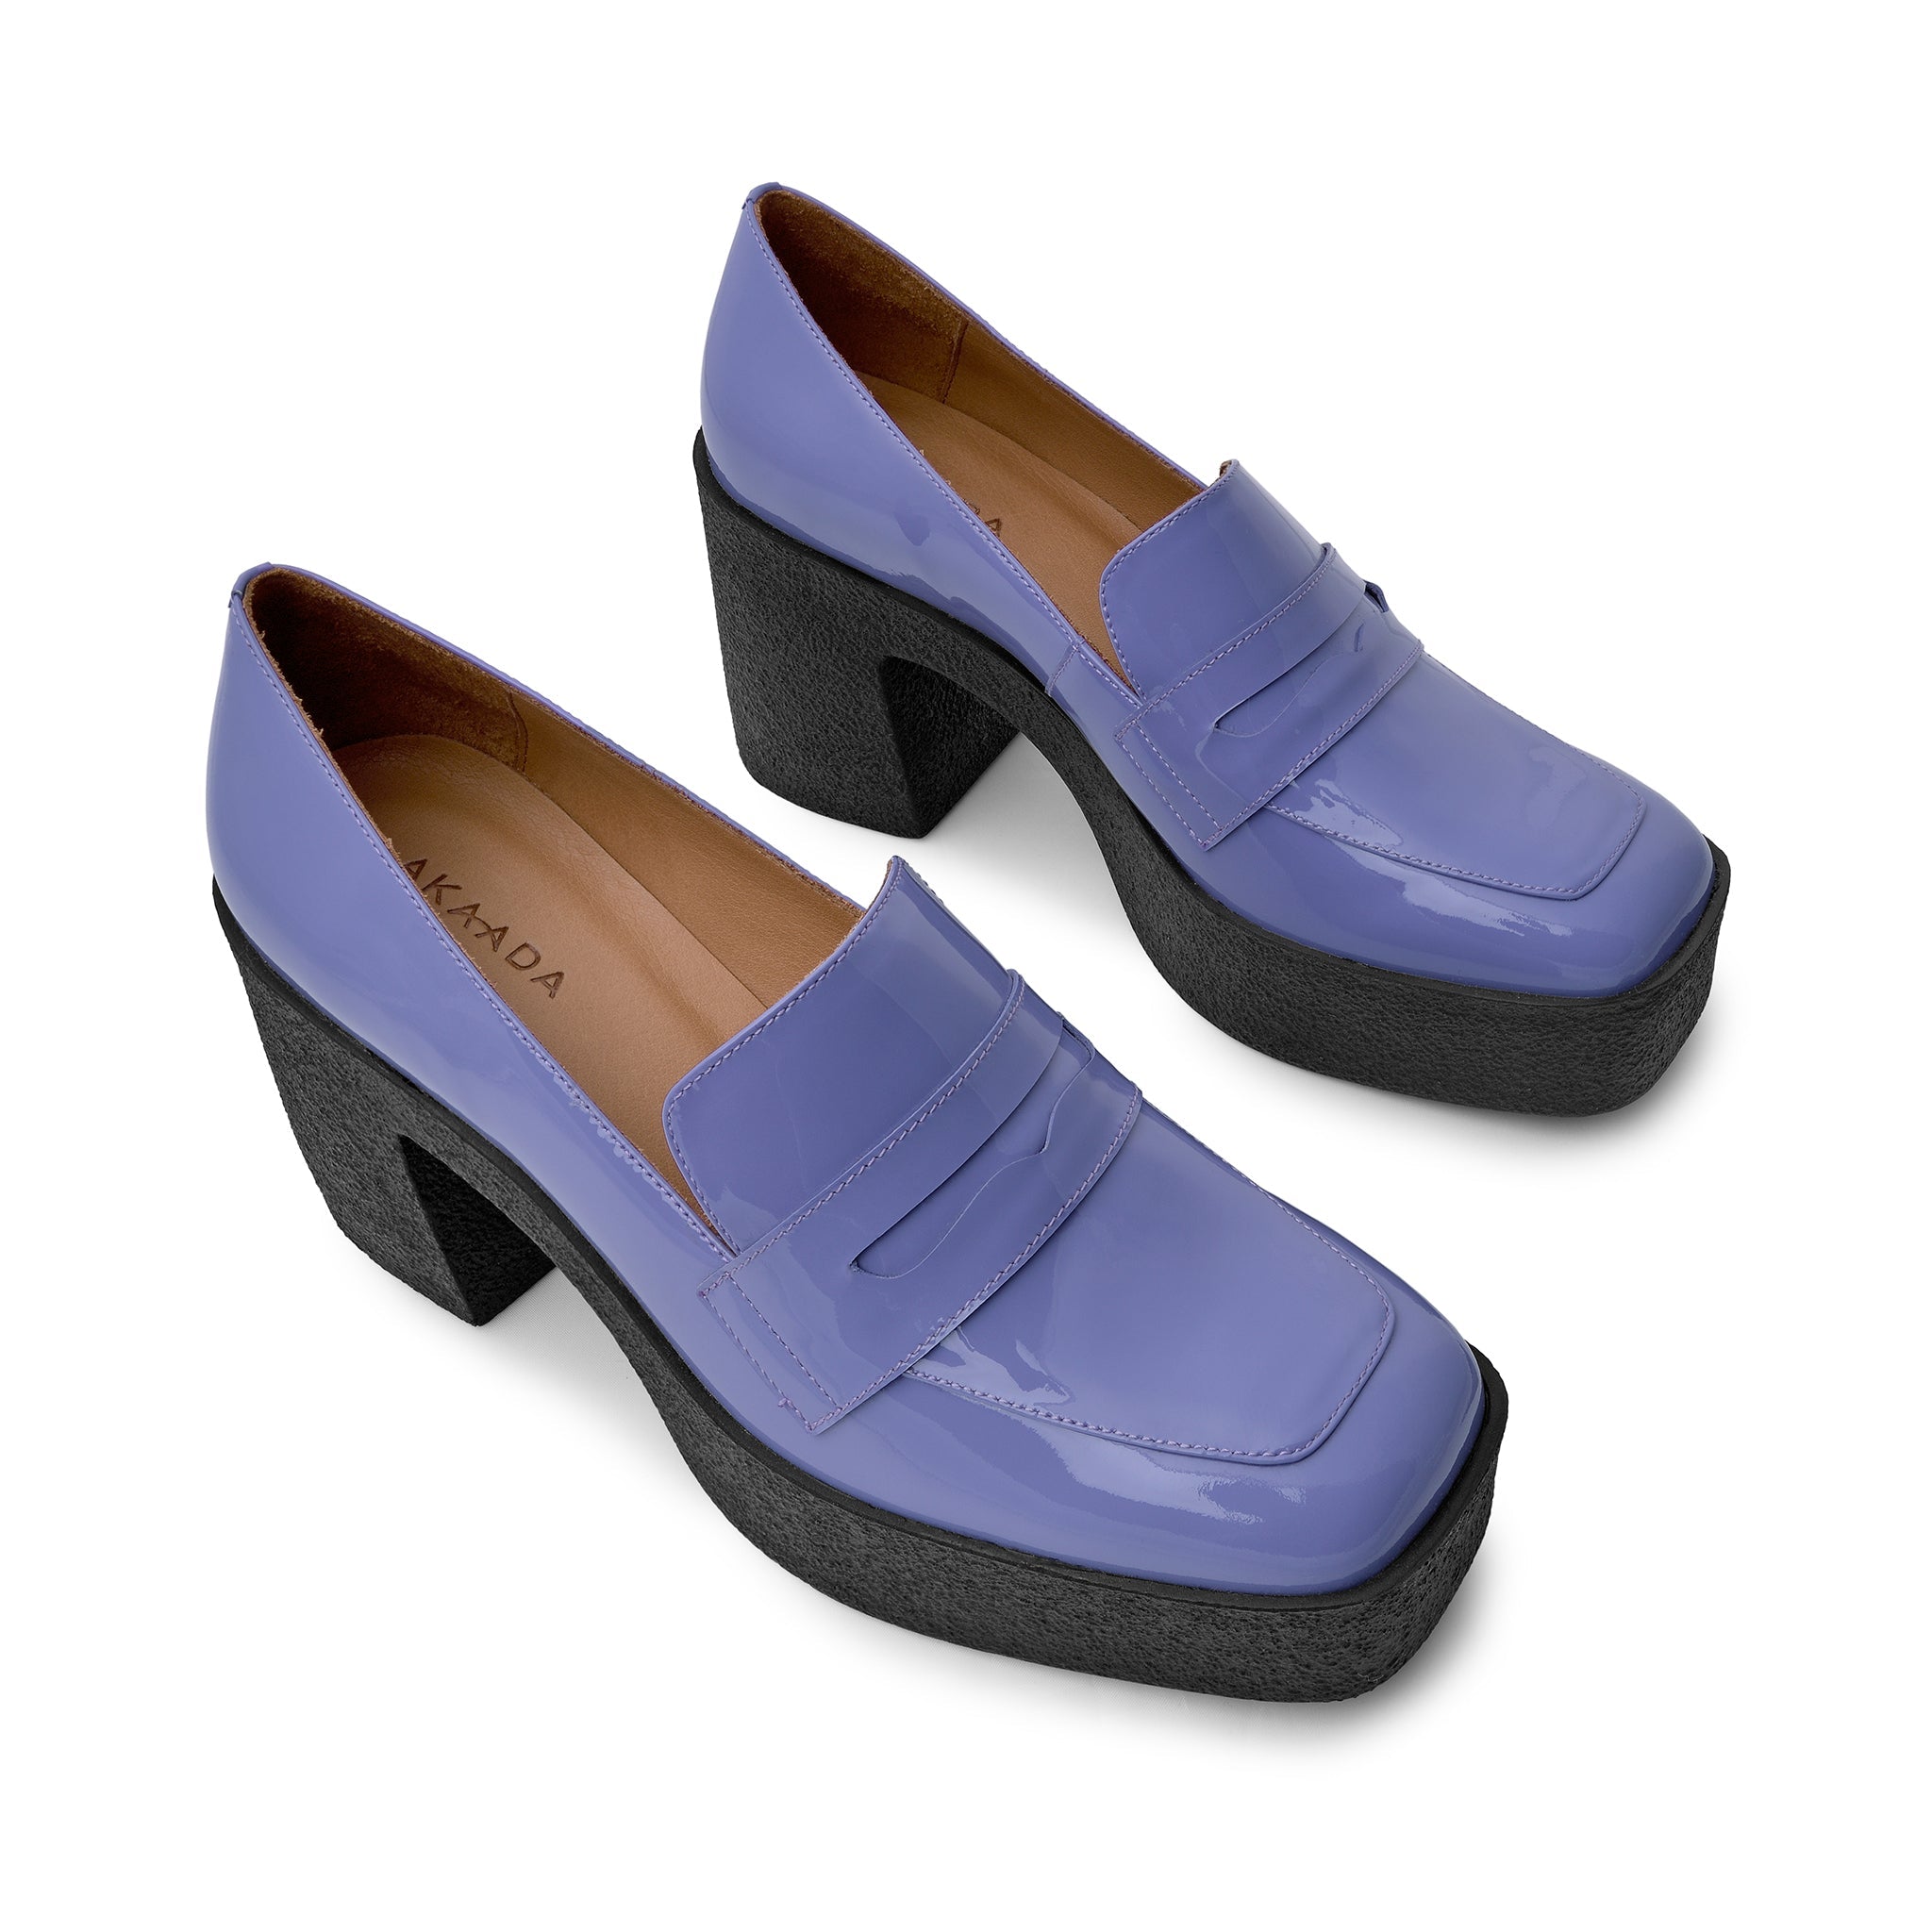 Yoko Lilac Patent Leather Chunky Loafers 21031-01-04 -8